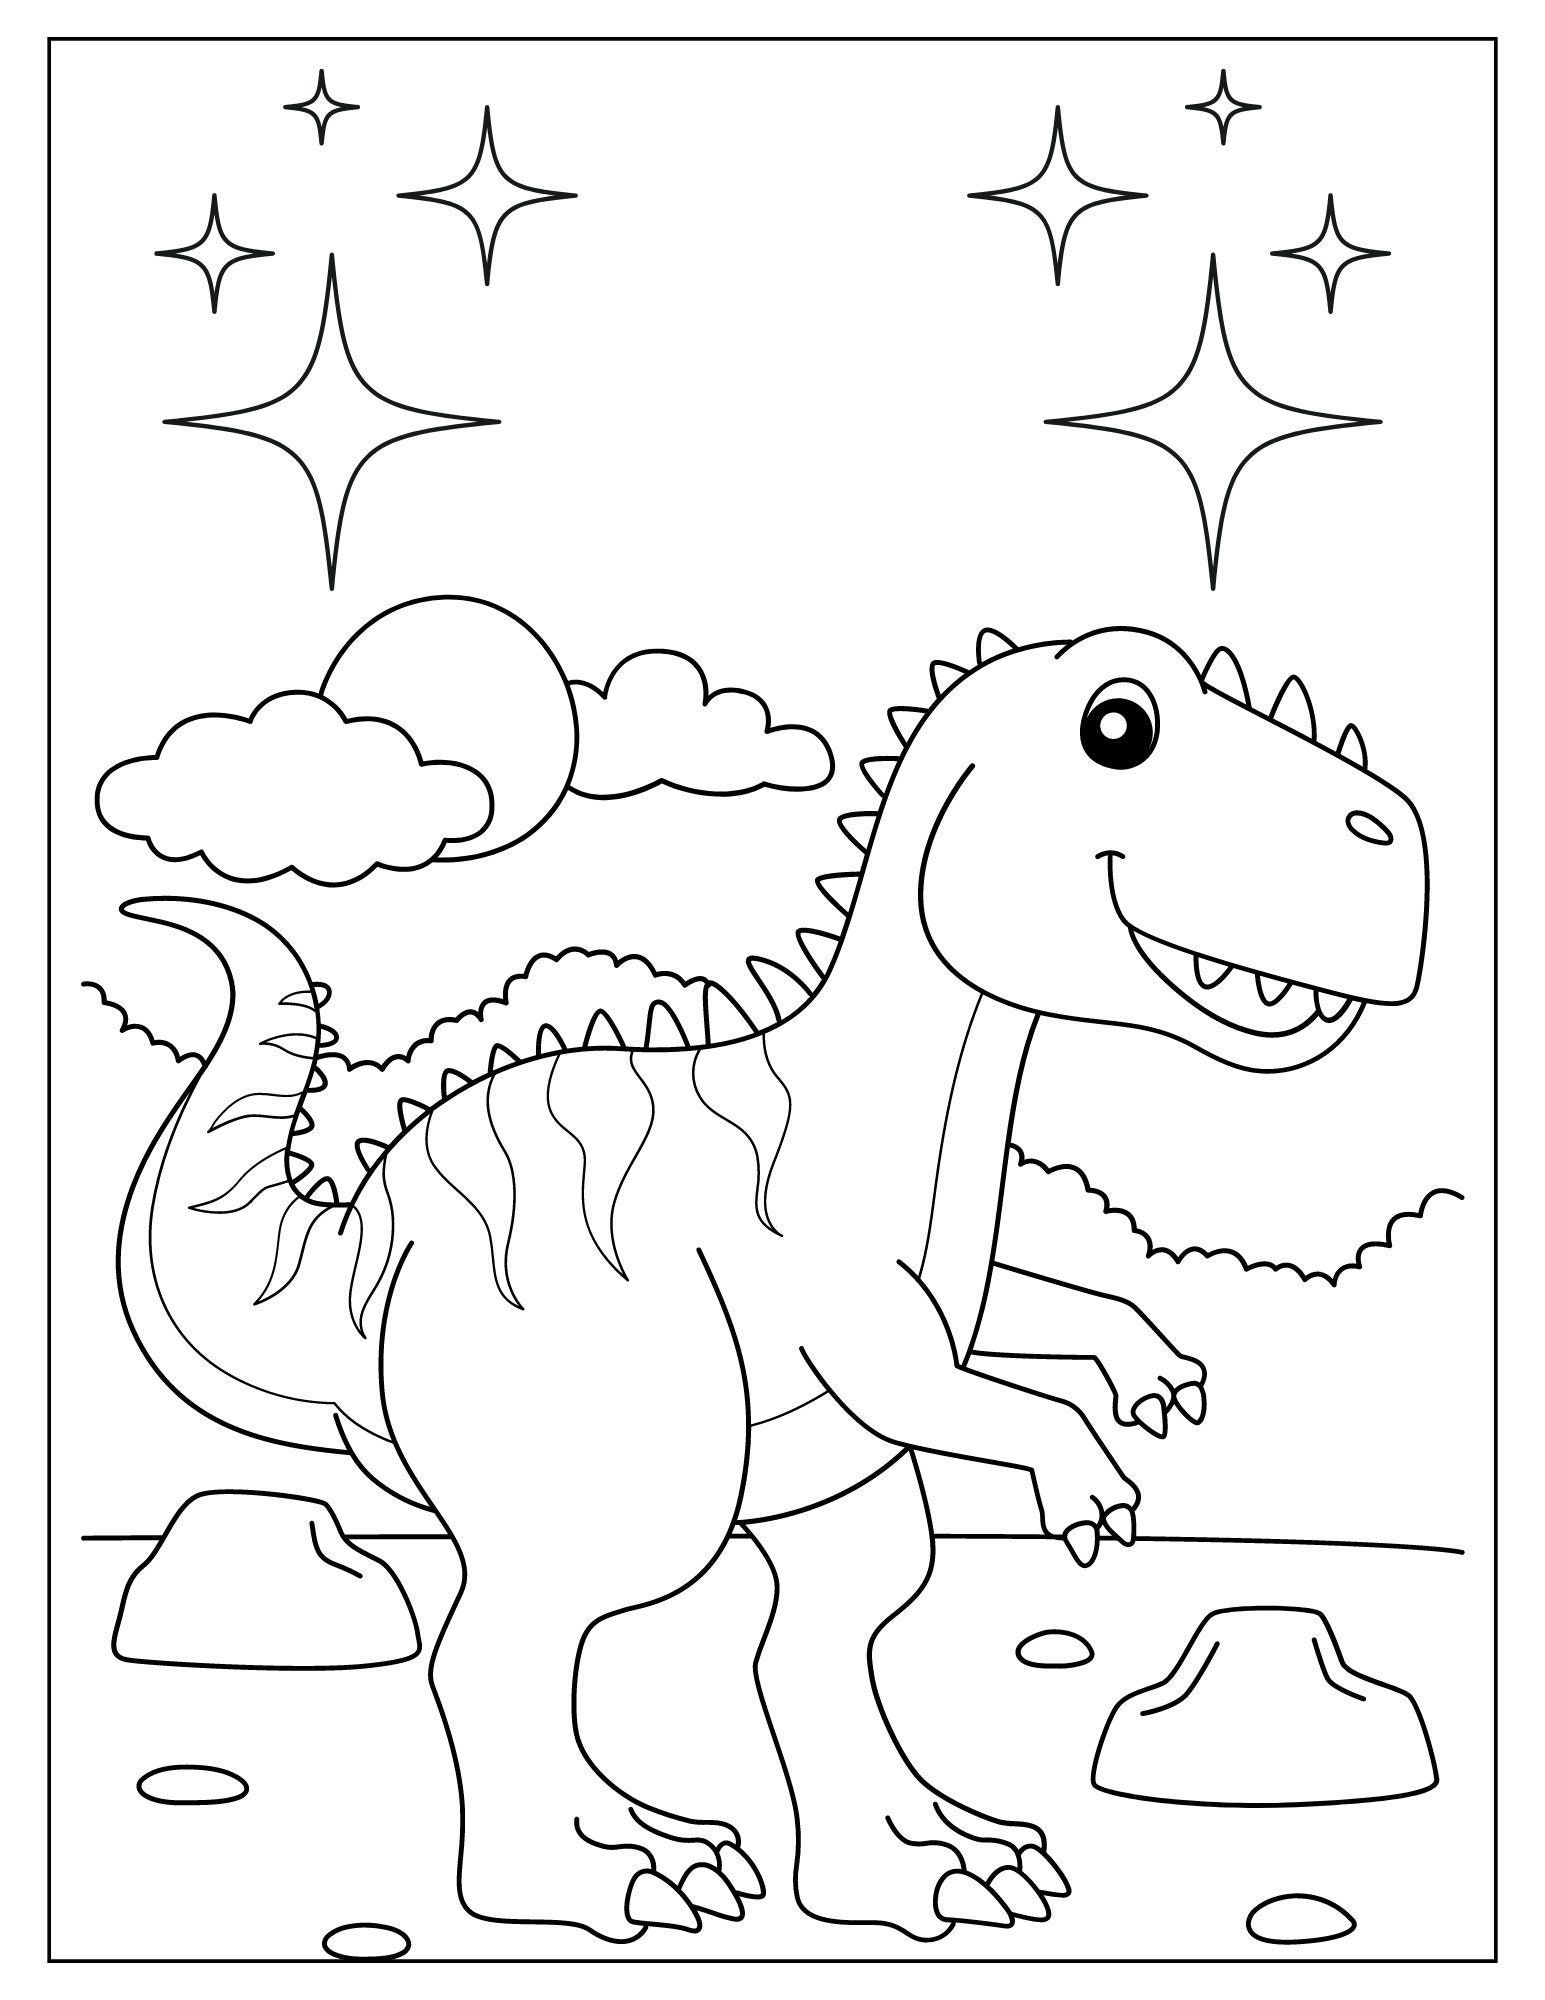 dinosaur coloring page, dino coloring book, kids coloring book, adult coloring book, printable coloring book, summer activity